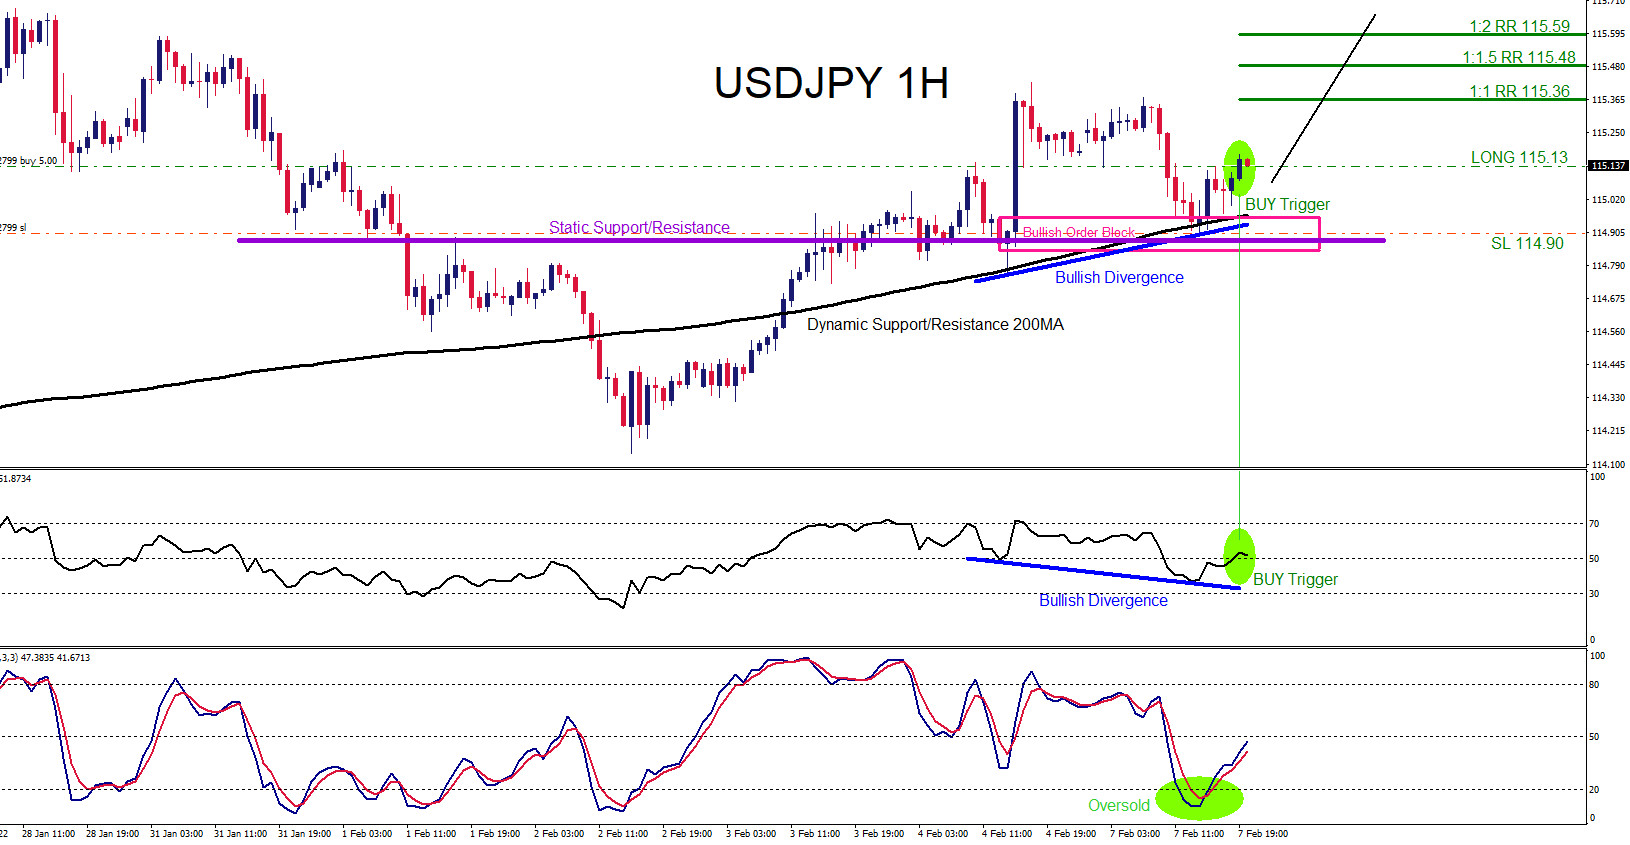 USDJPY : Trading the Move Higher